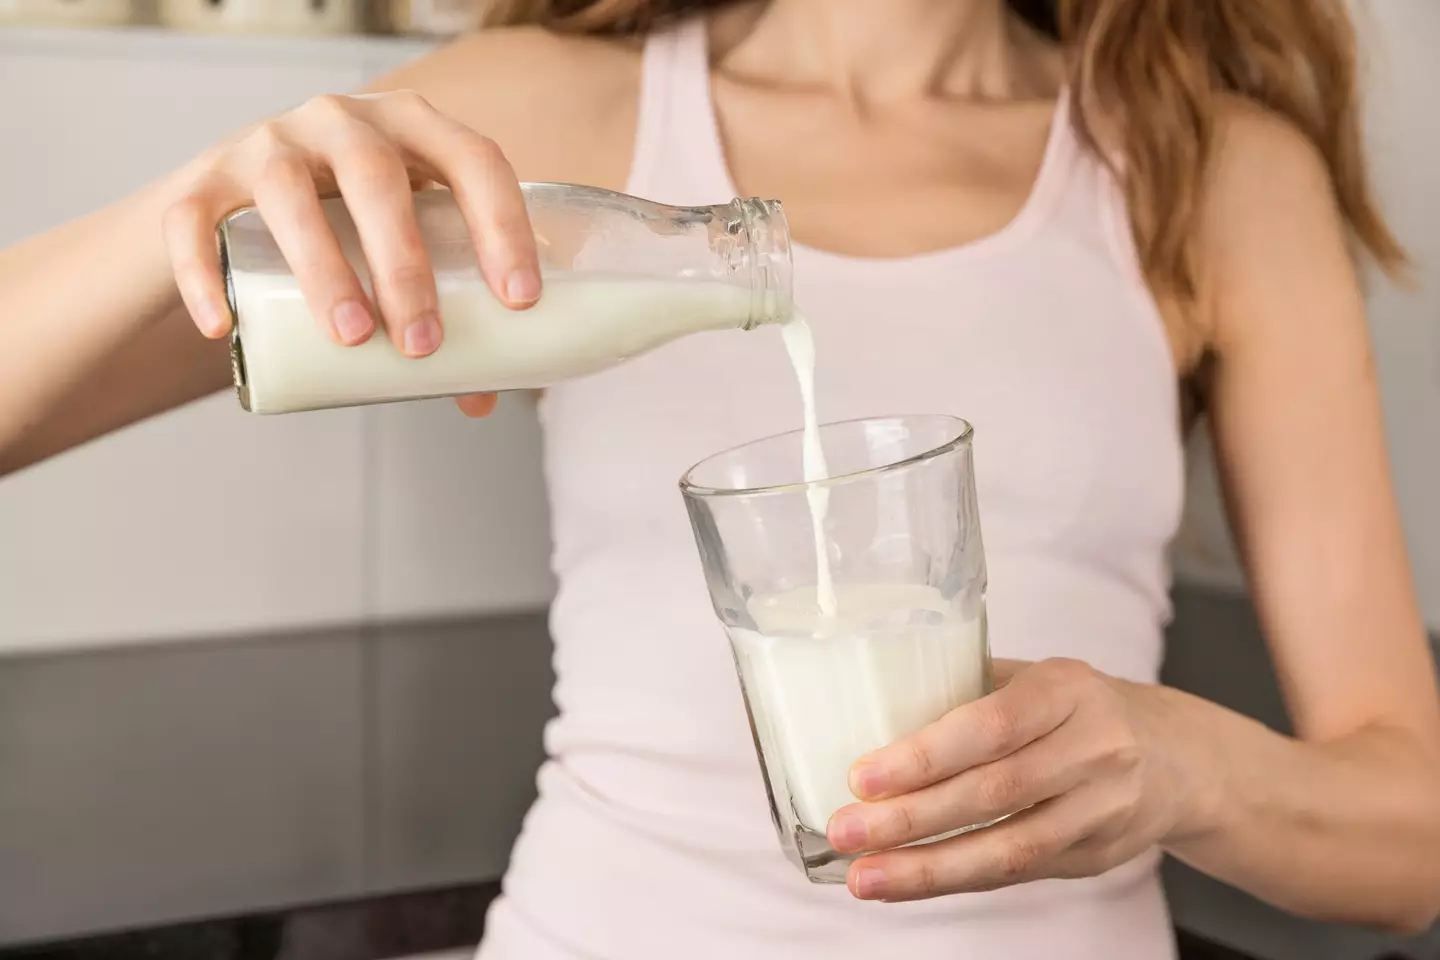 A glass of milk is said to help line the stomach before a night out on the town.